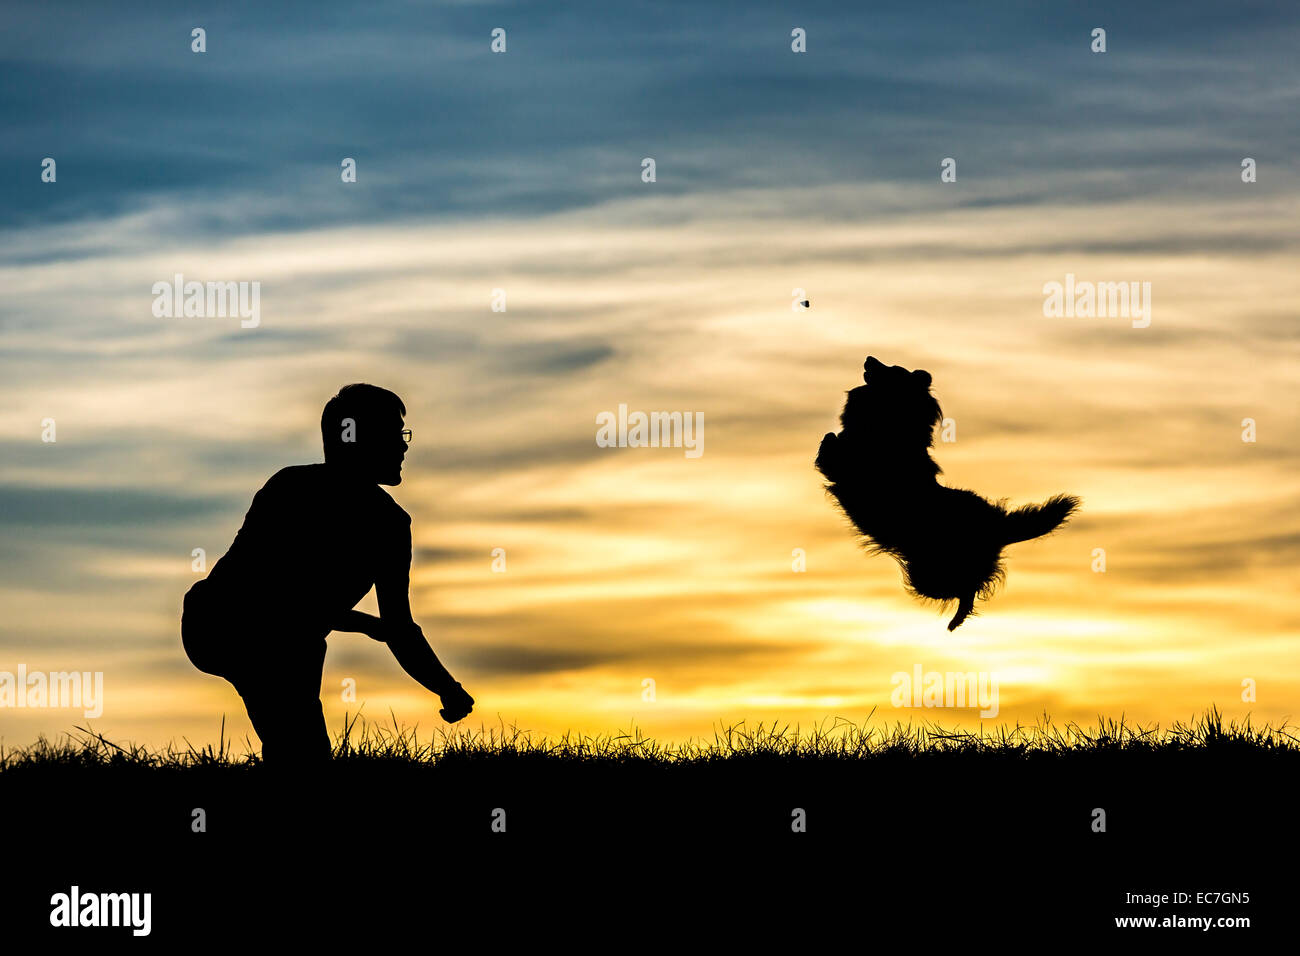 Germany, Man with dog, Silhouettes at sunset Stock Photo